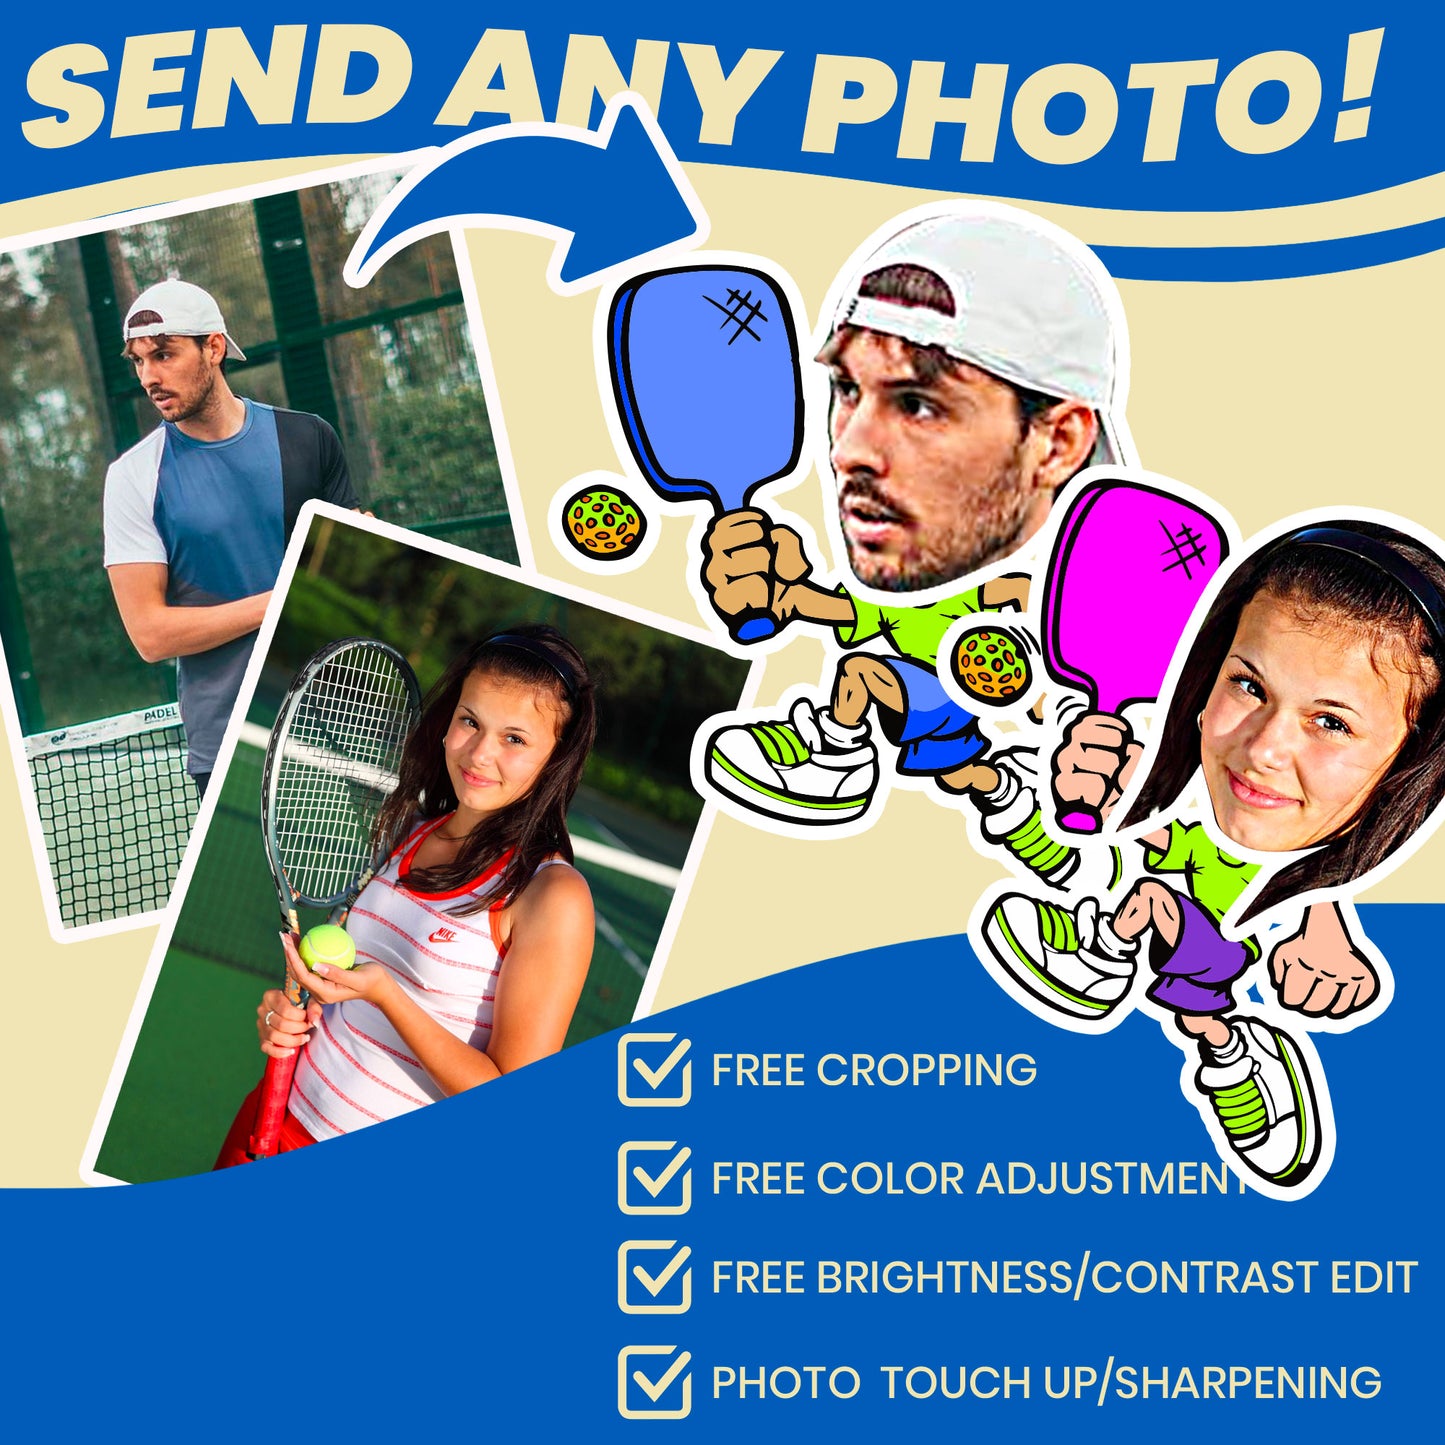 process of sending any photo and how it is cropped and edited into cartoon pickleball bodies 